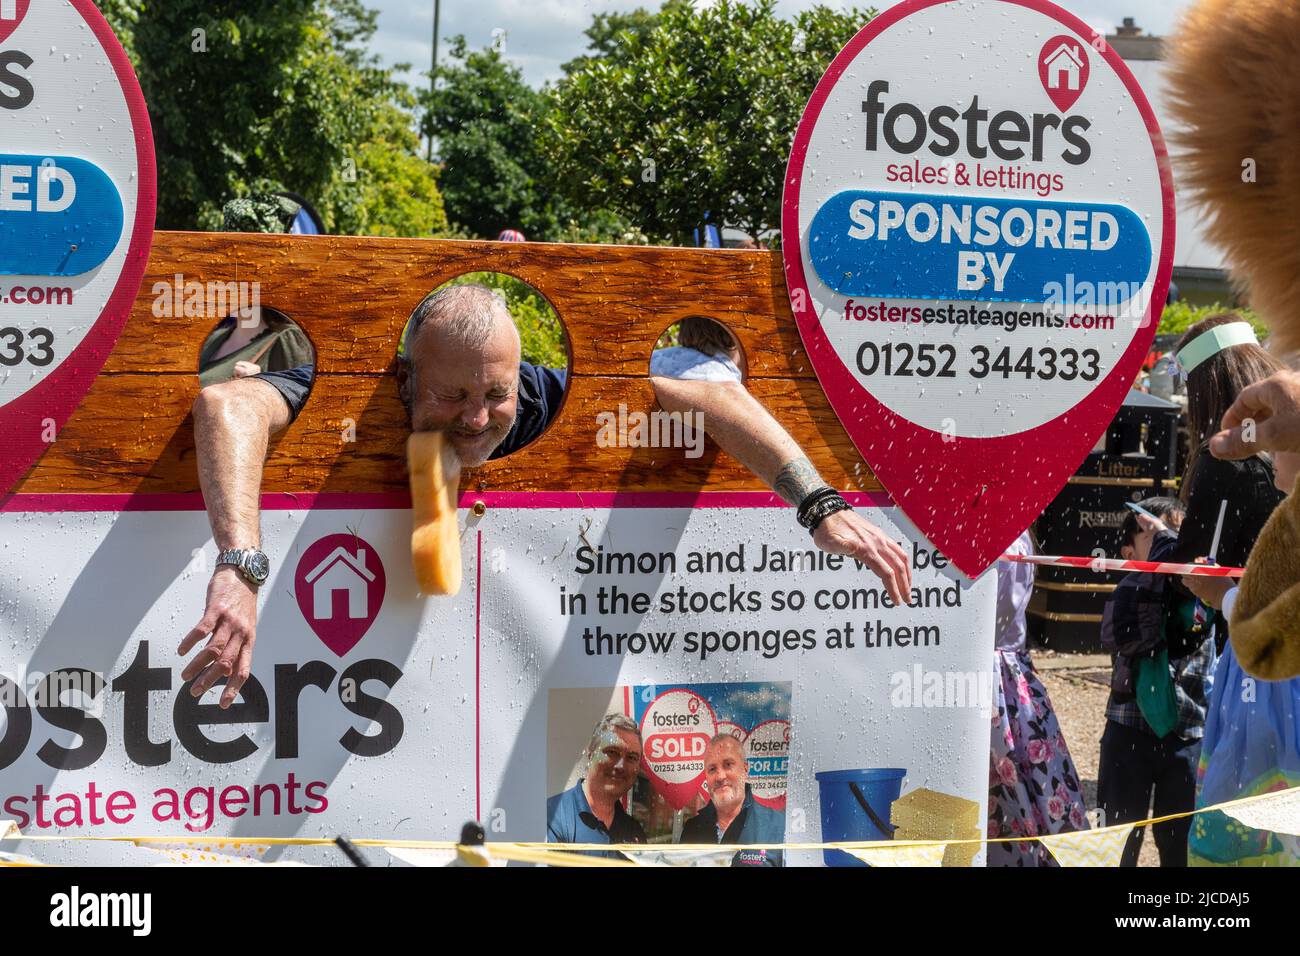 Wet sponge throwing at Victoria Day Event in Aldershot, Hampshire, England, UK, sponsored by Fosters Estate Agents Stock Photo